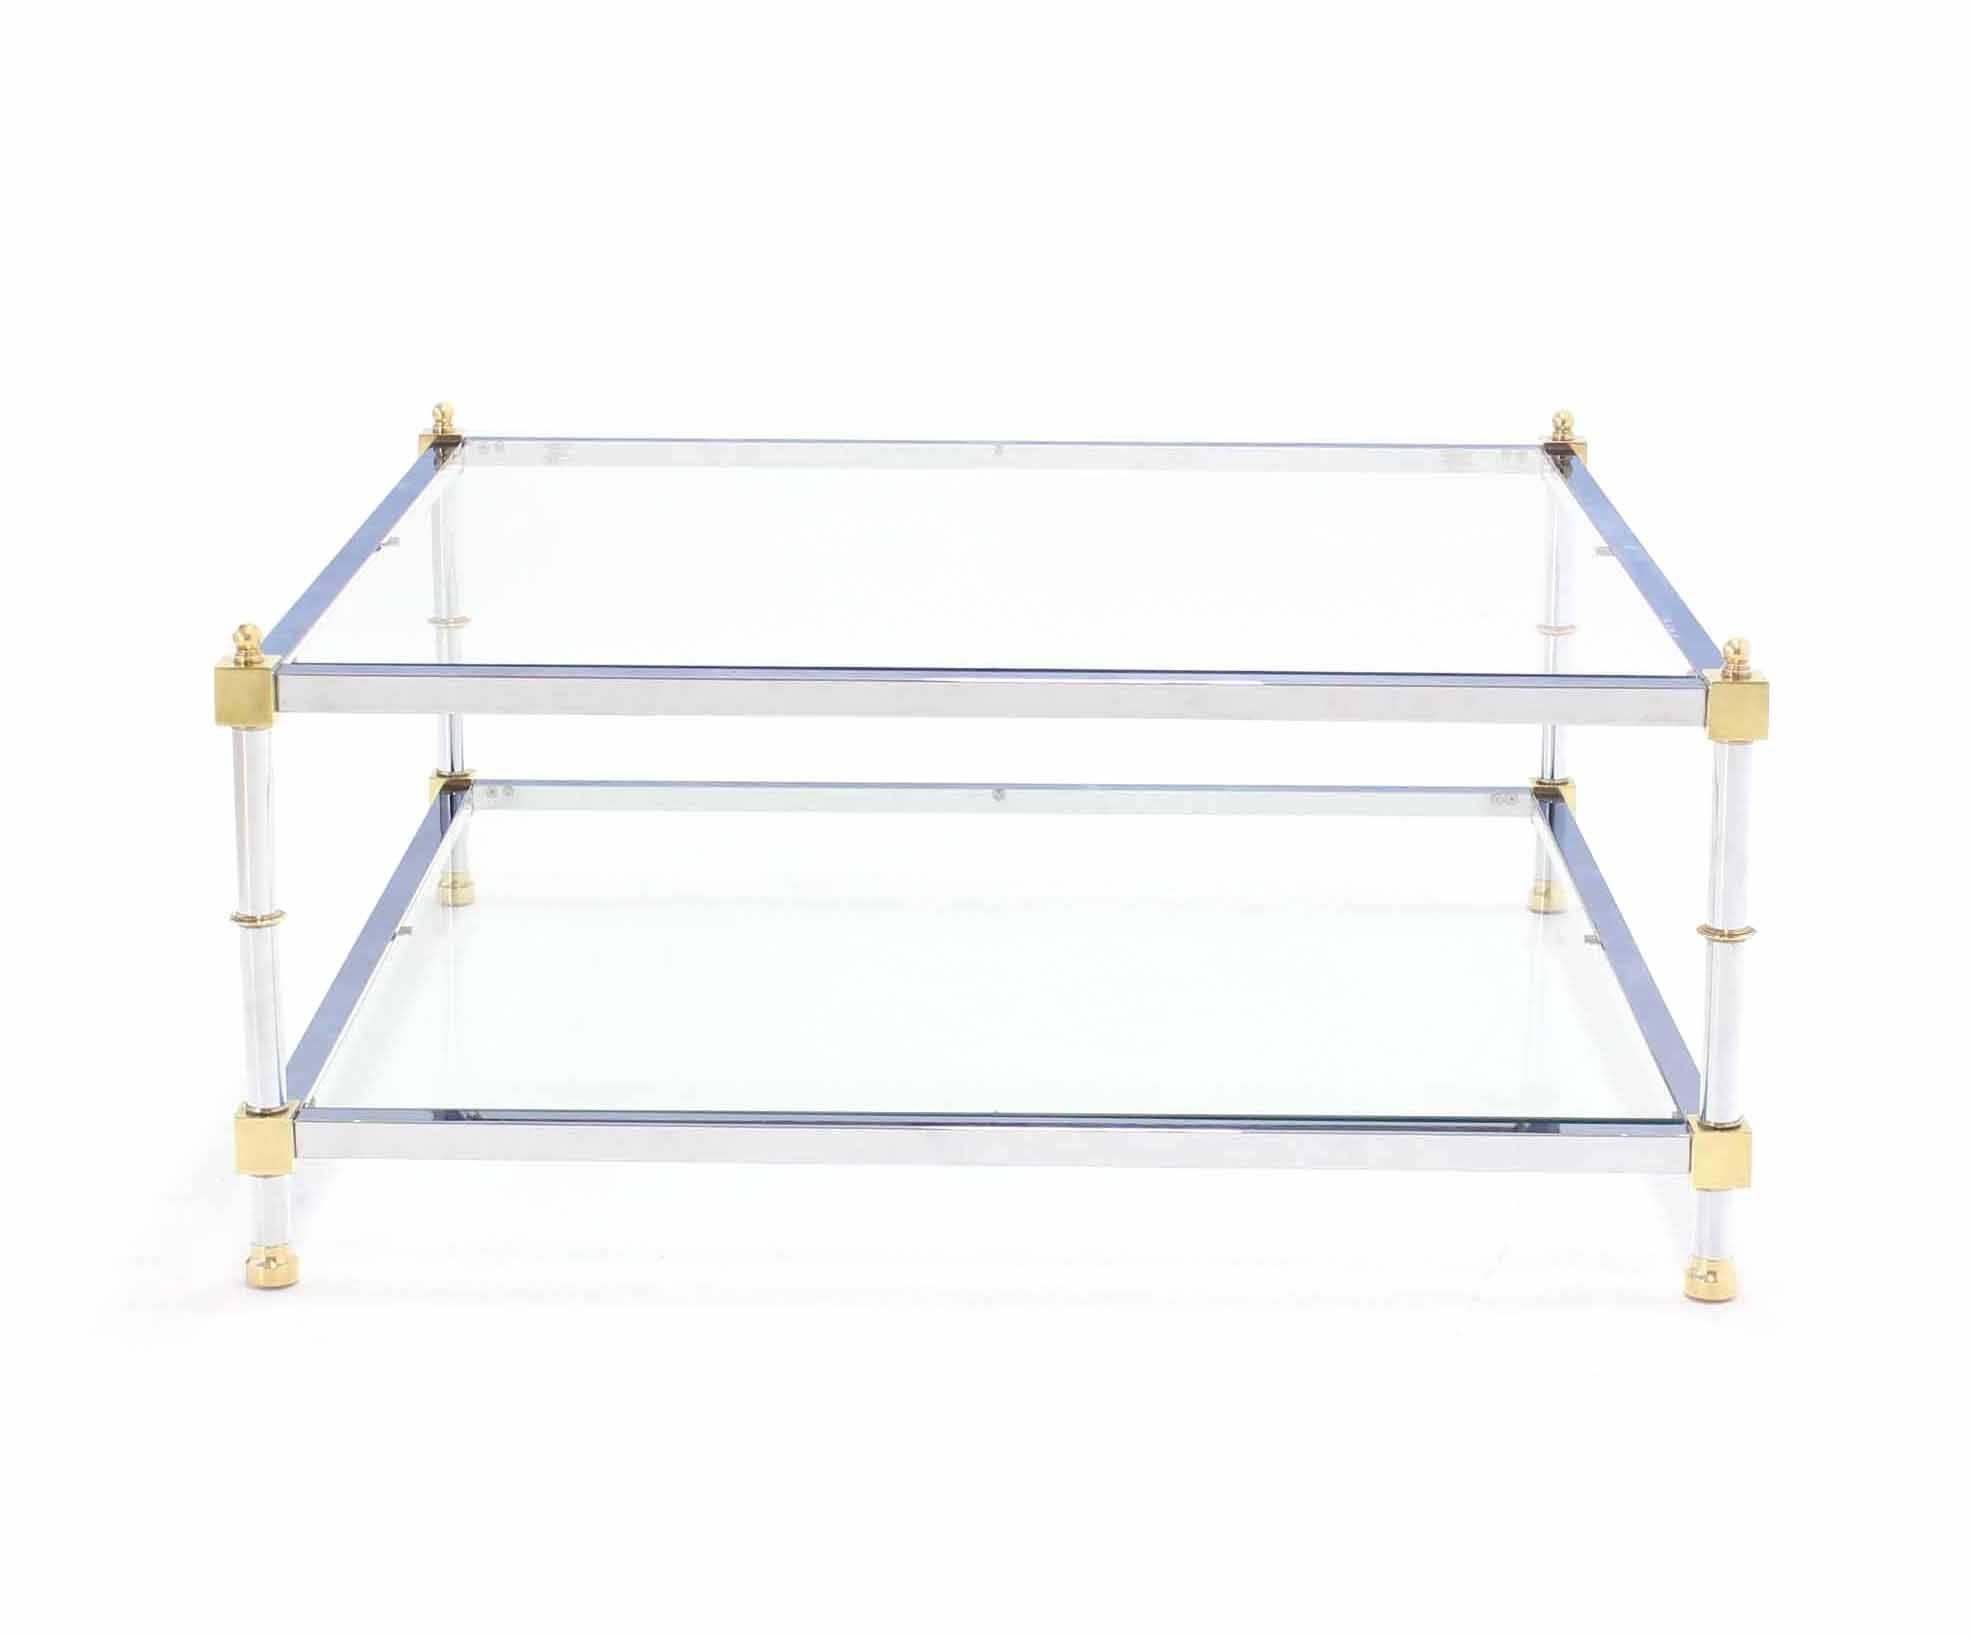 Glass polished chrome and brass Mid-Century Modern square two-tier coffee table. Measures: 37 x 37.